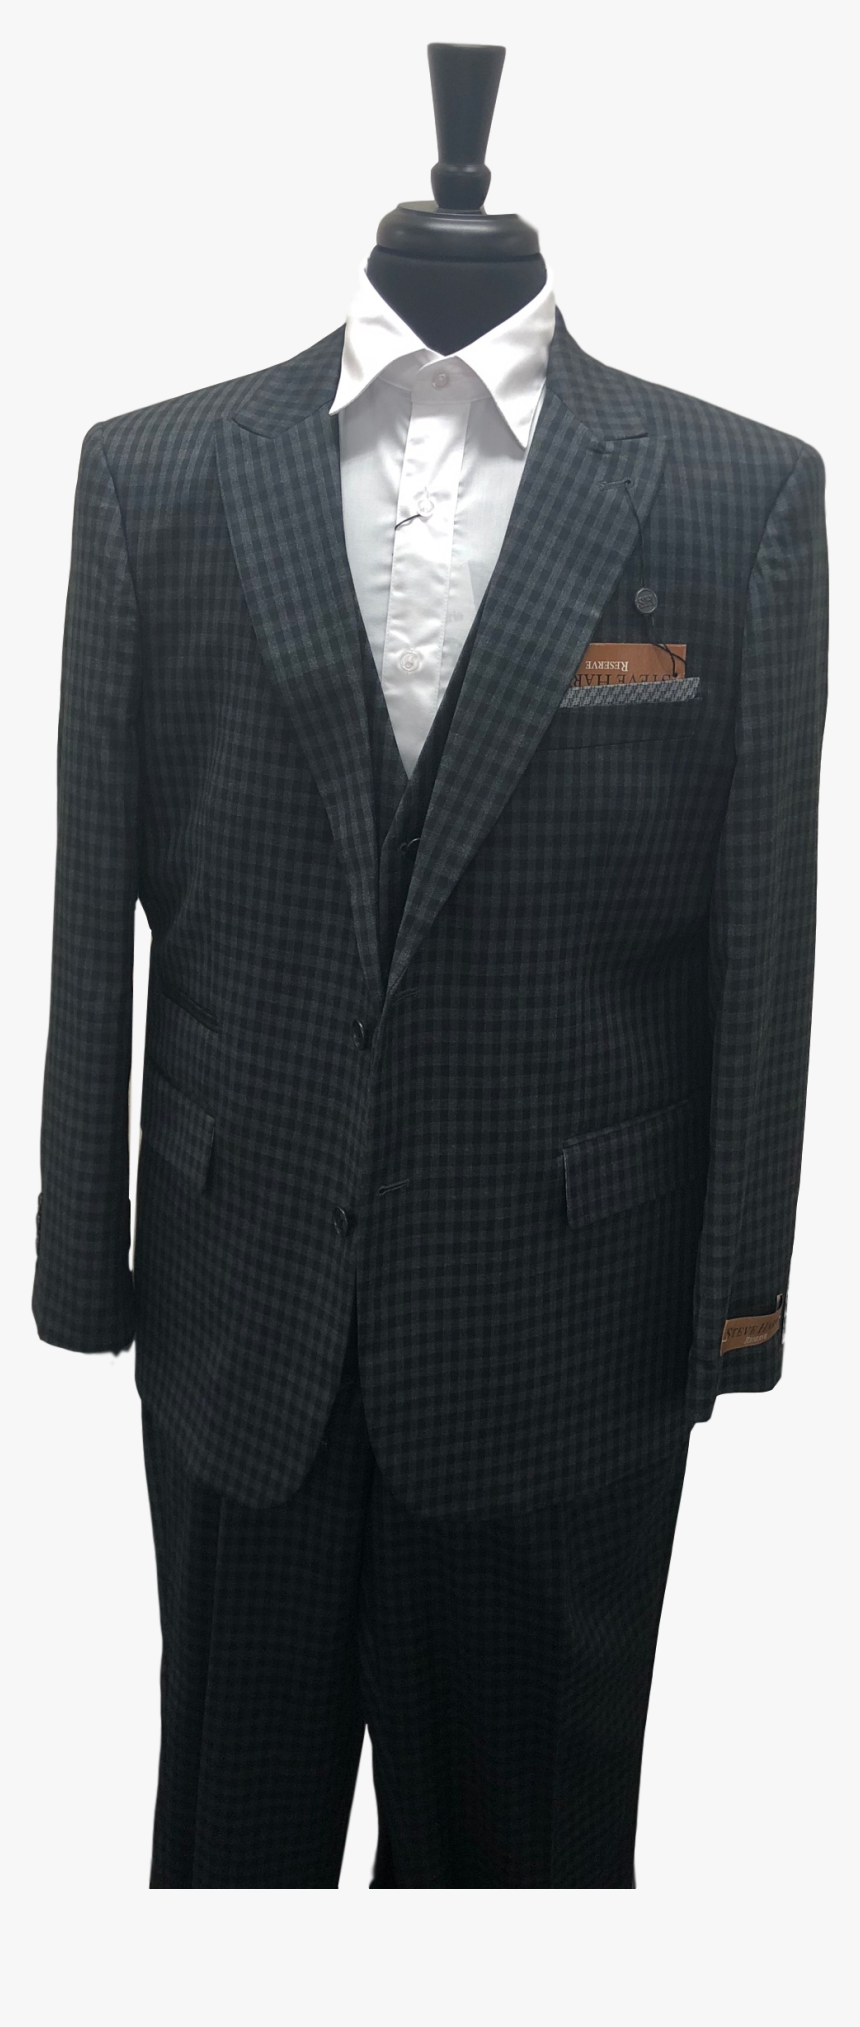 Steve Harvey Check Suit Black And Gray, HD Png Download, Free Download